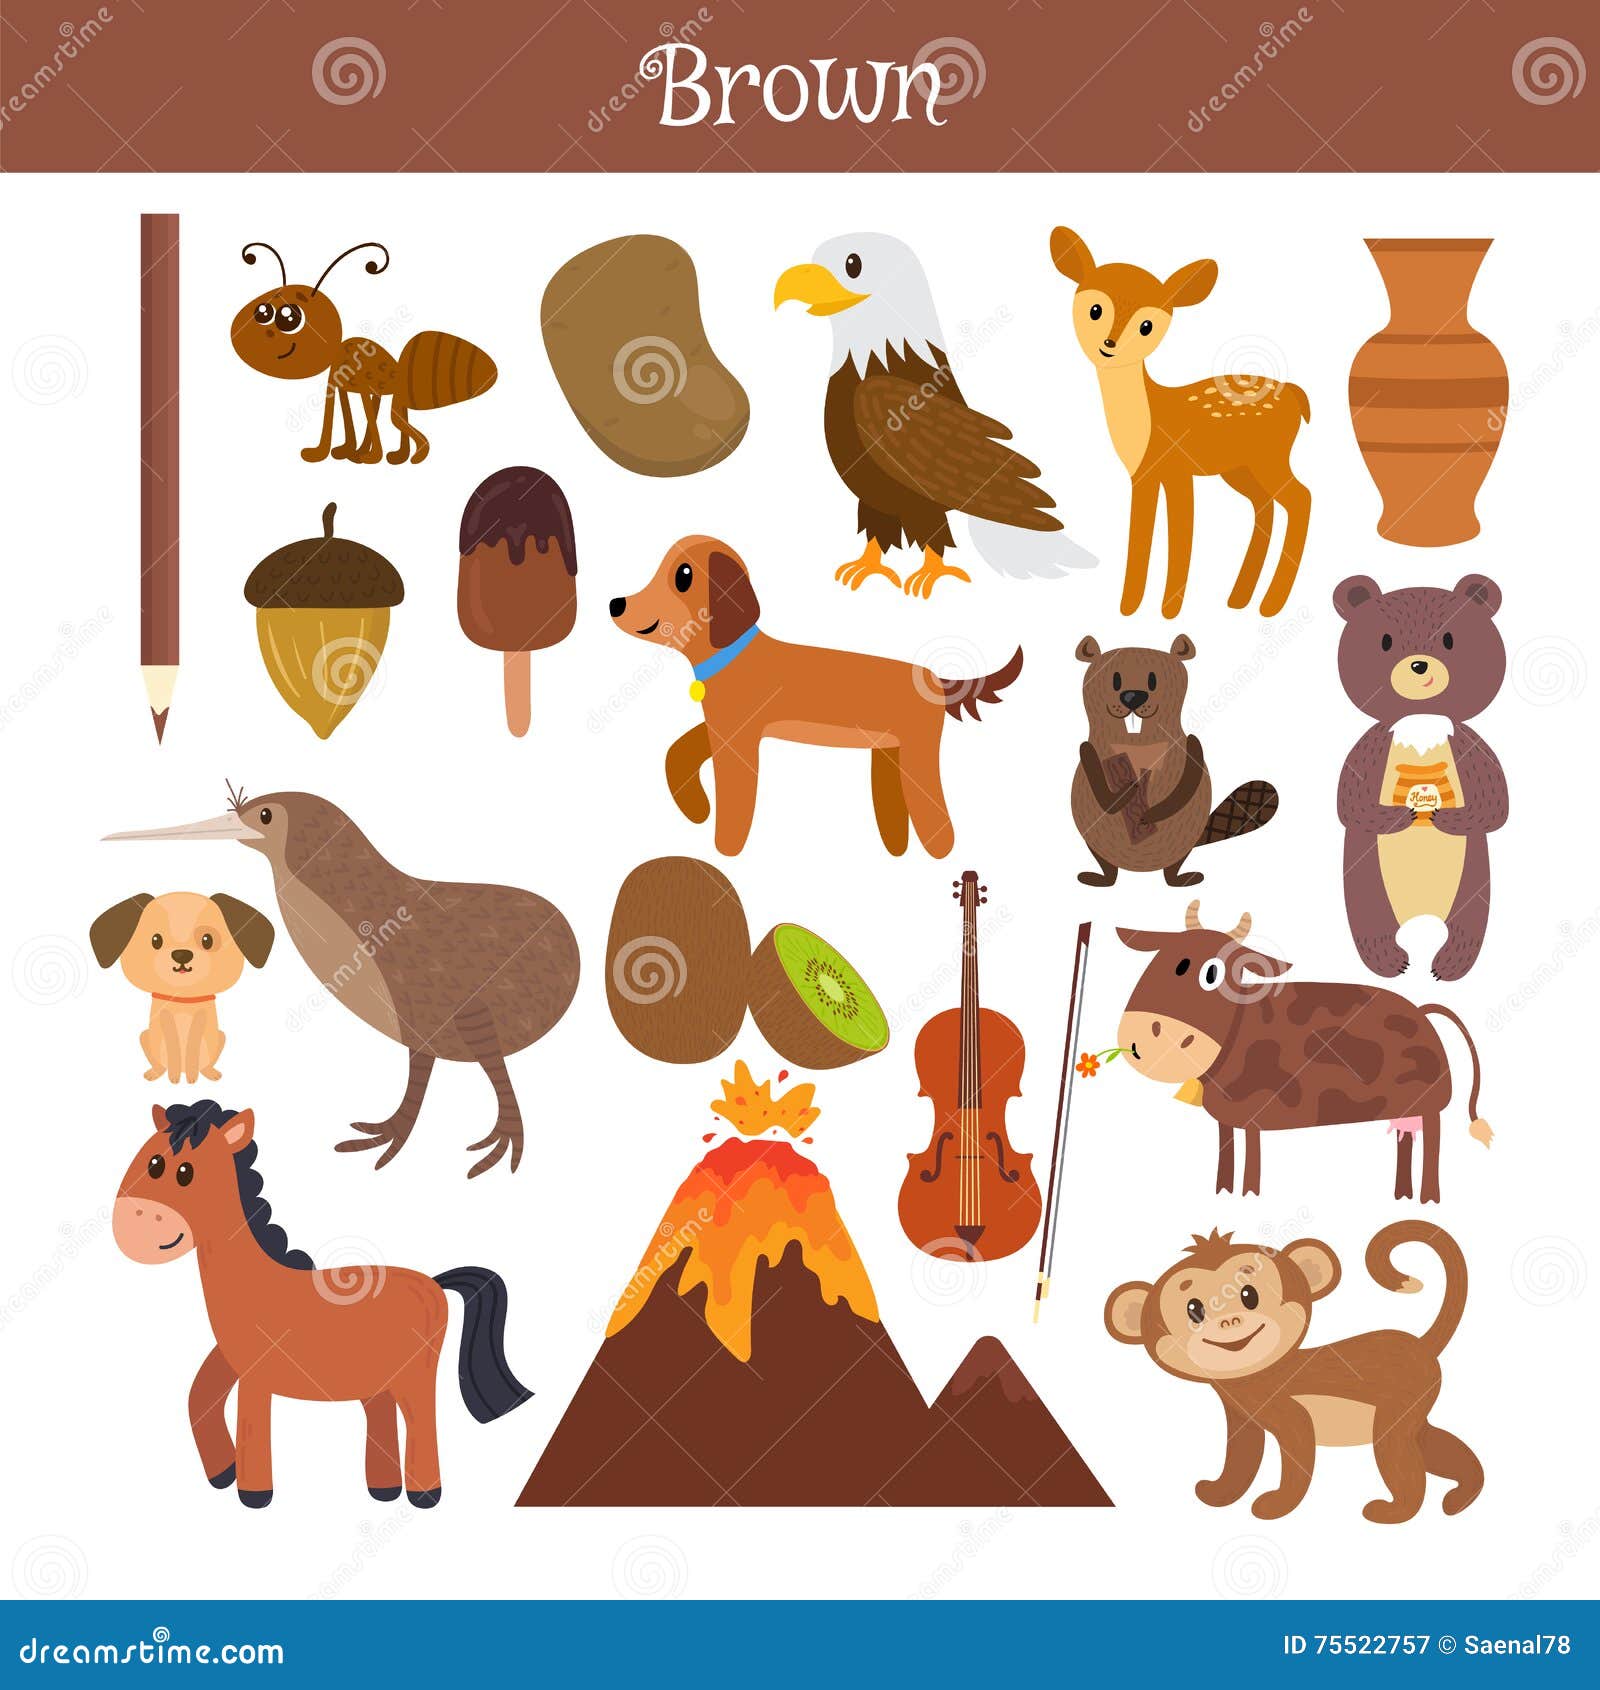 Brown. Learn the Color. Education Set. Illustration of Primary C ...